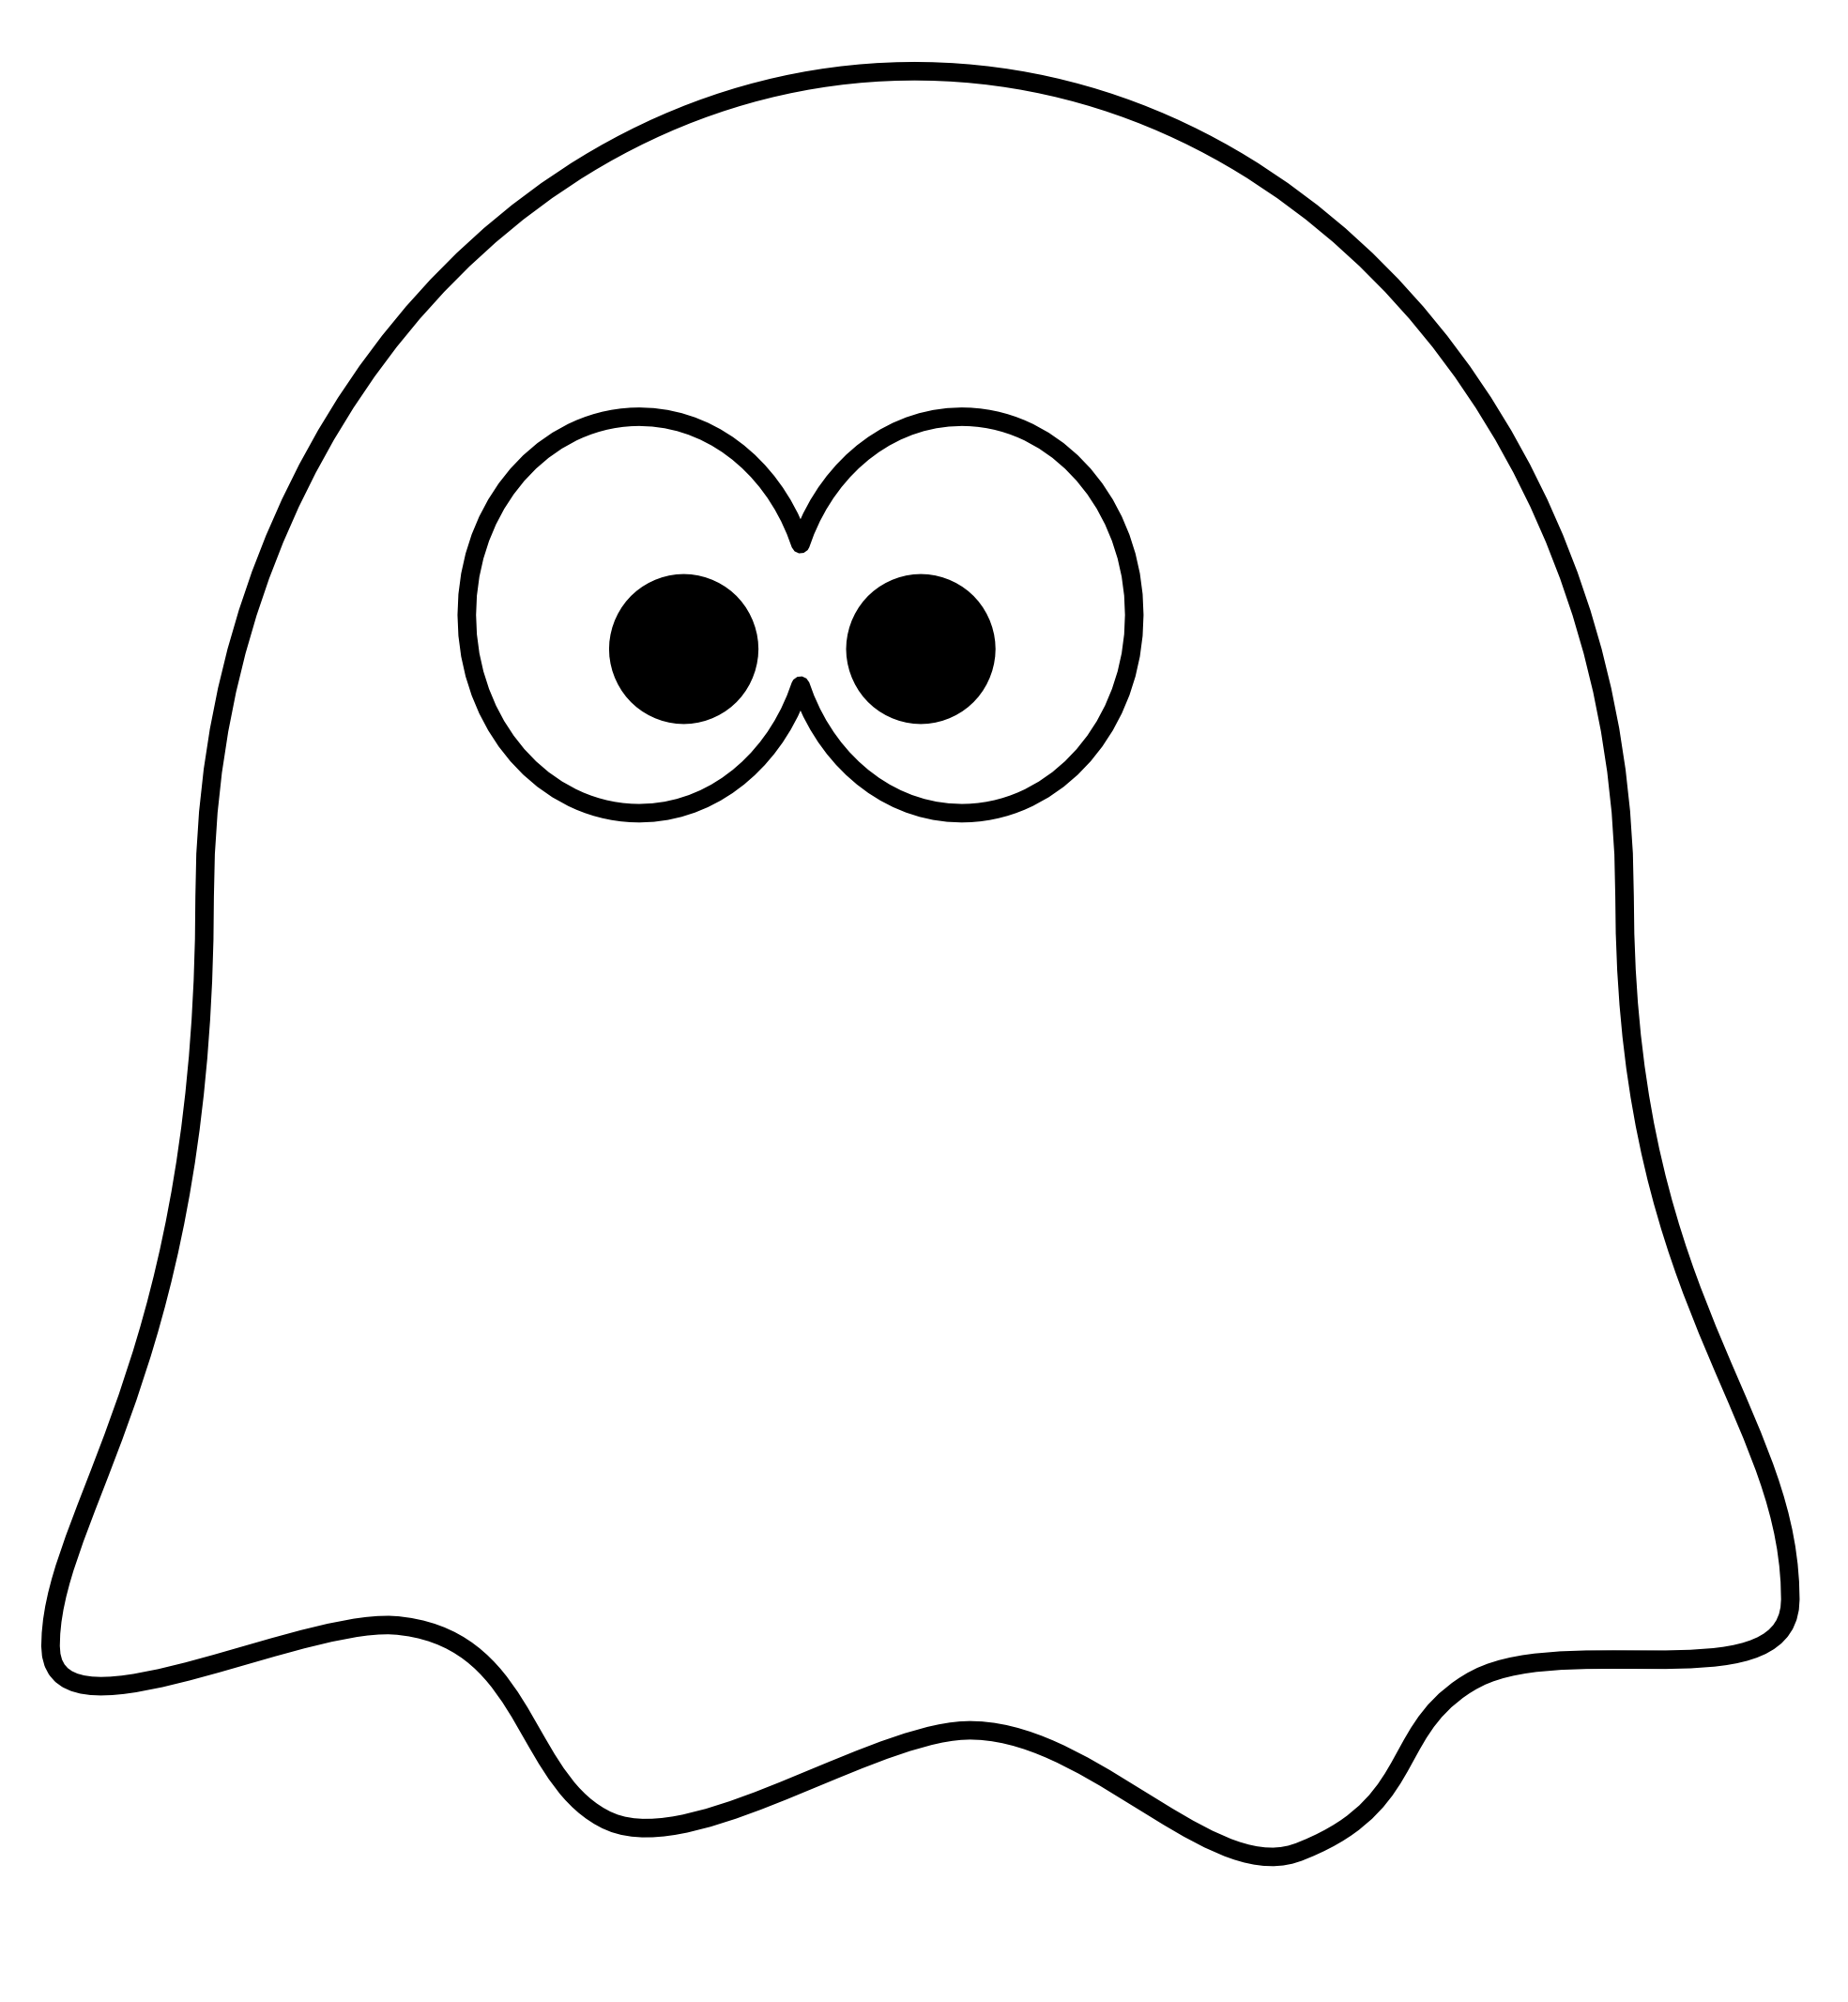 Cartoon Ghost Pictures